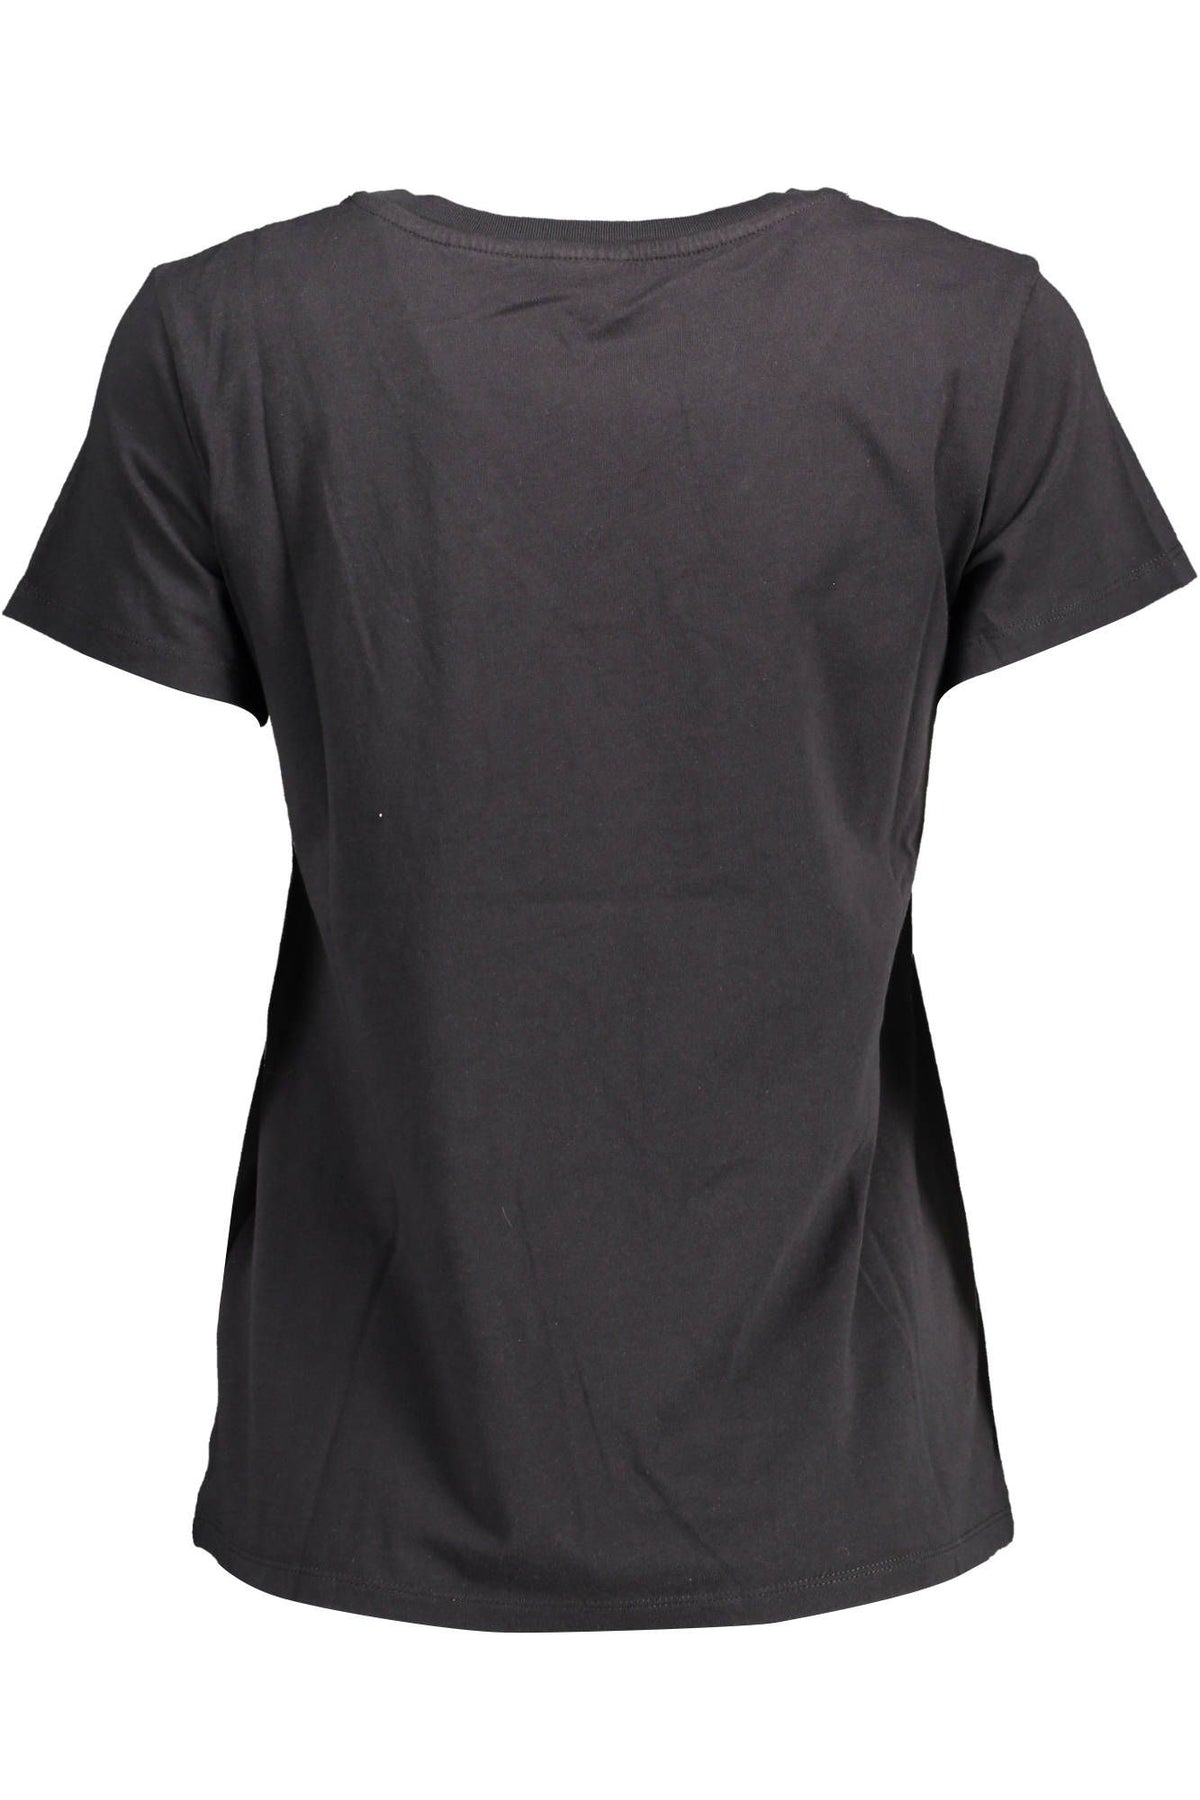 Levi's Chic V-Neck Cotton Tee with Emblematic Appeal